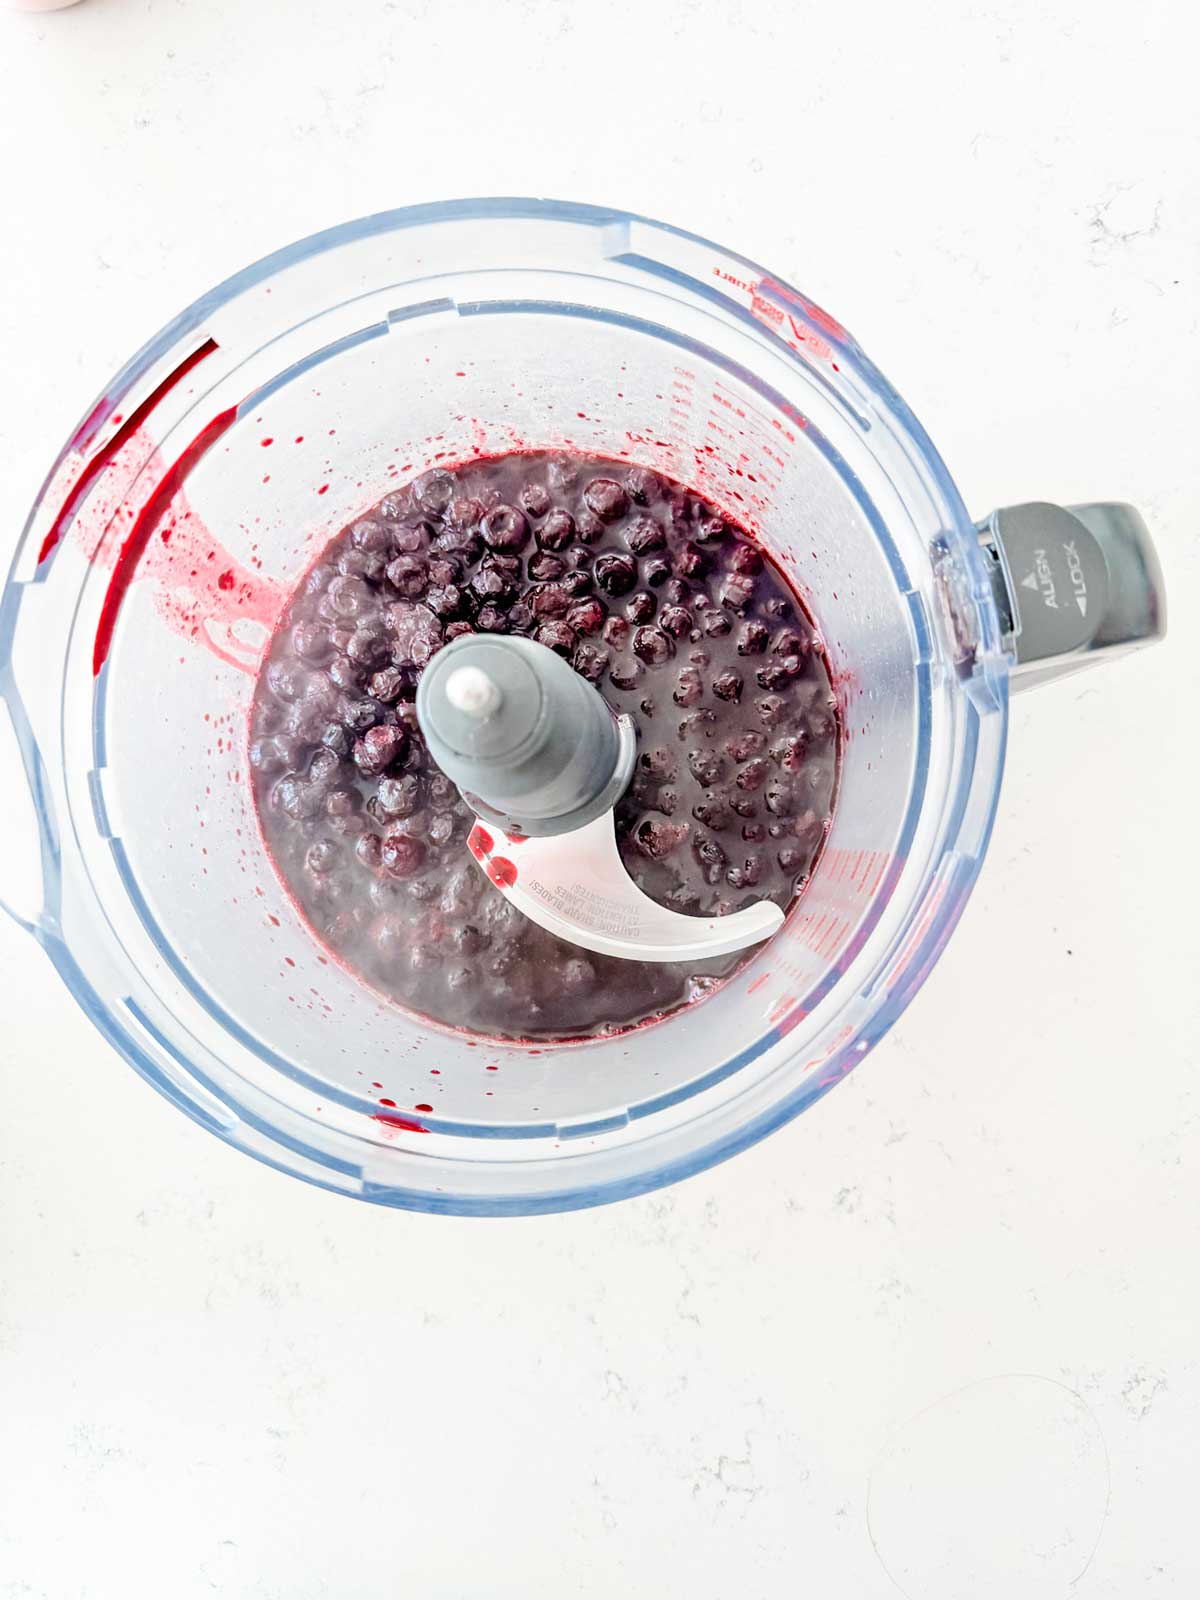 Blueberry compote in a food processor.